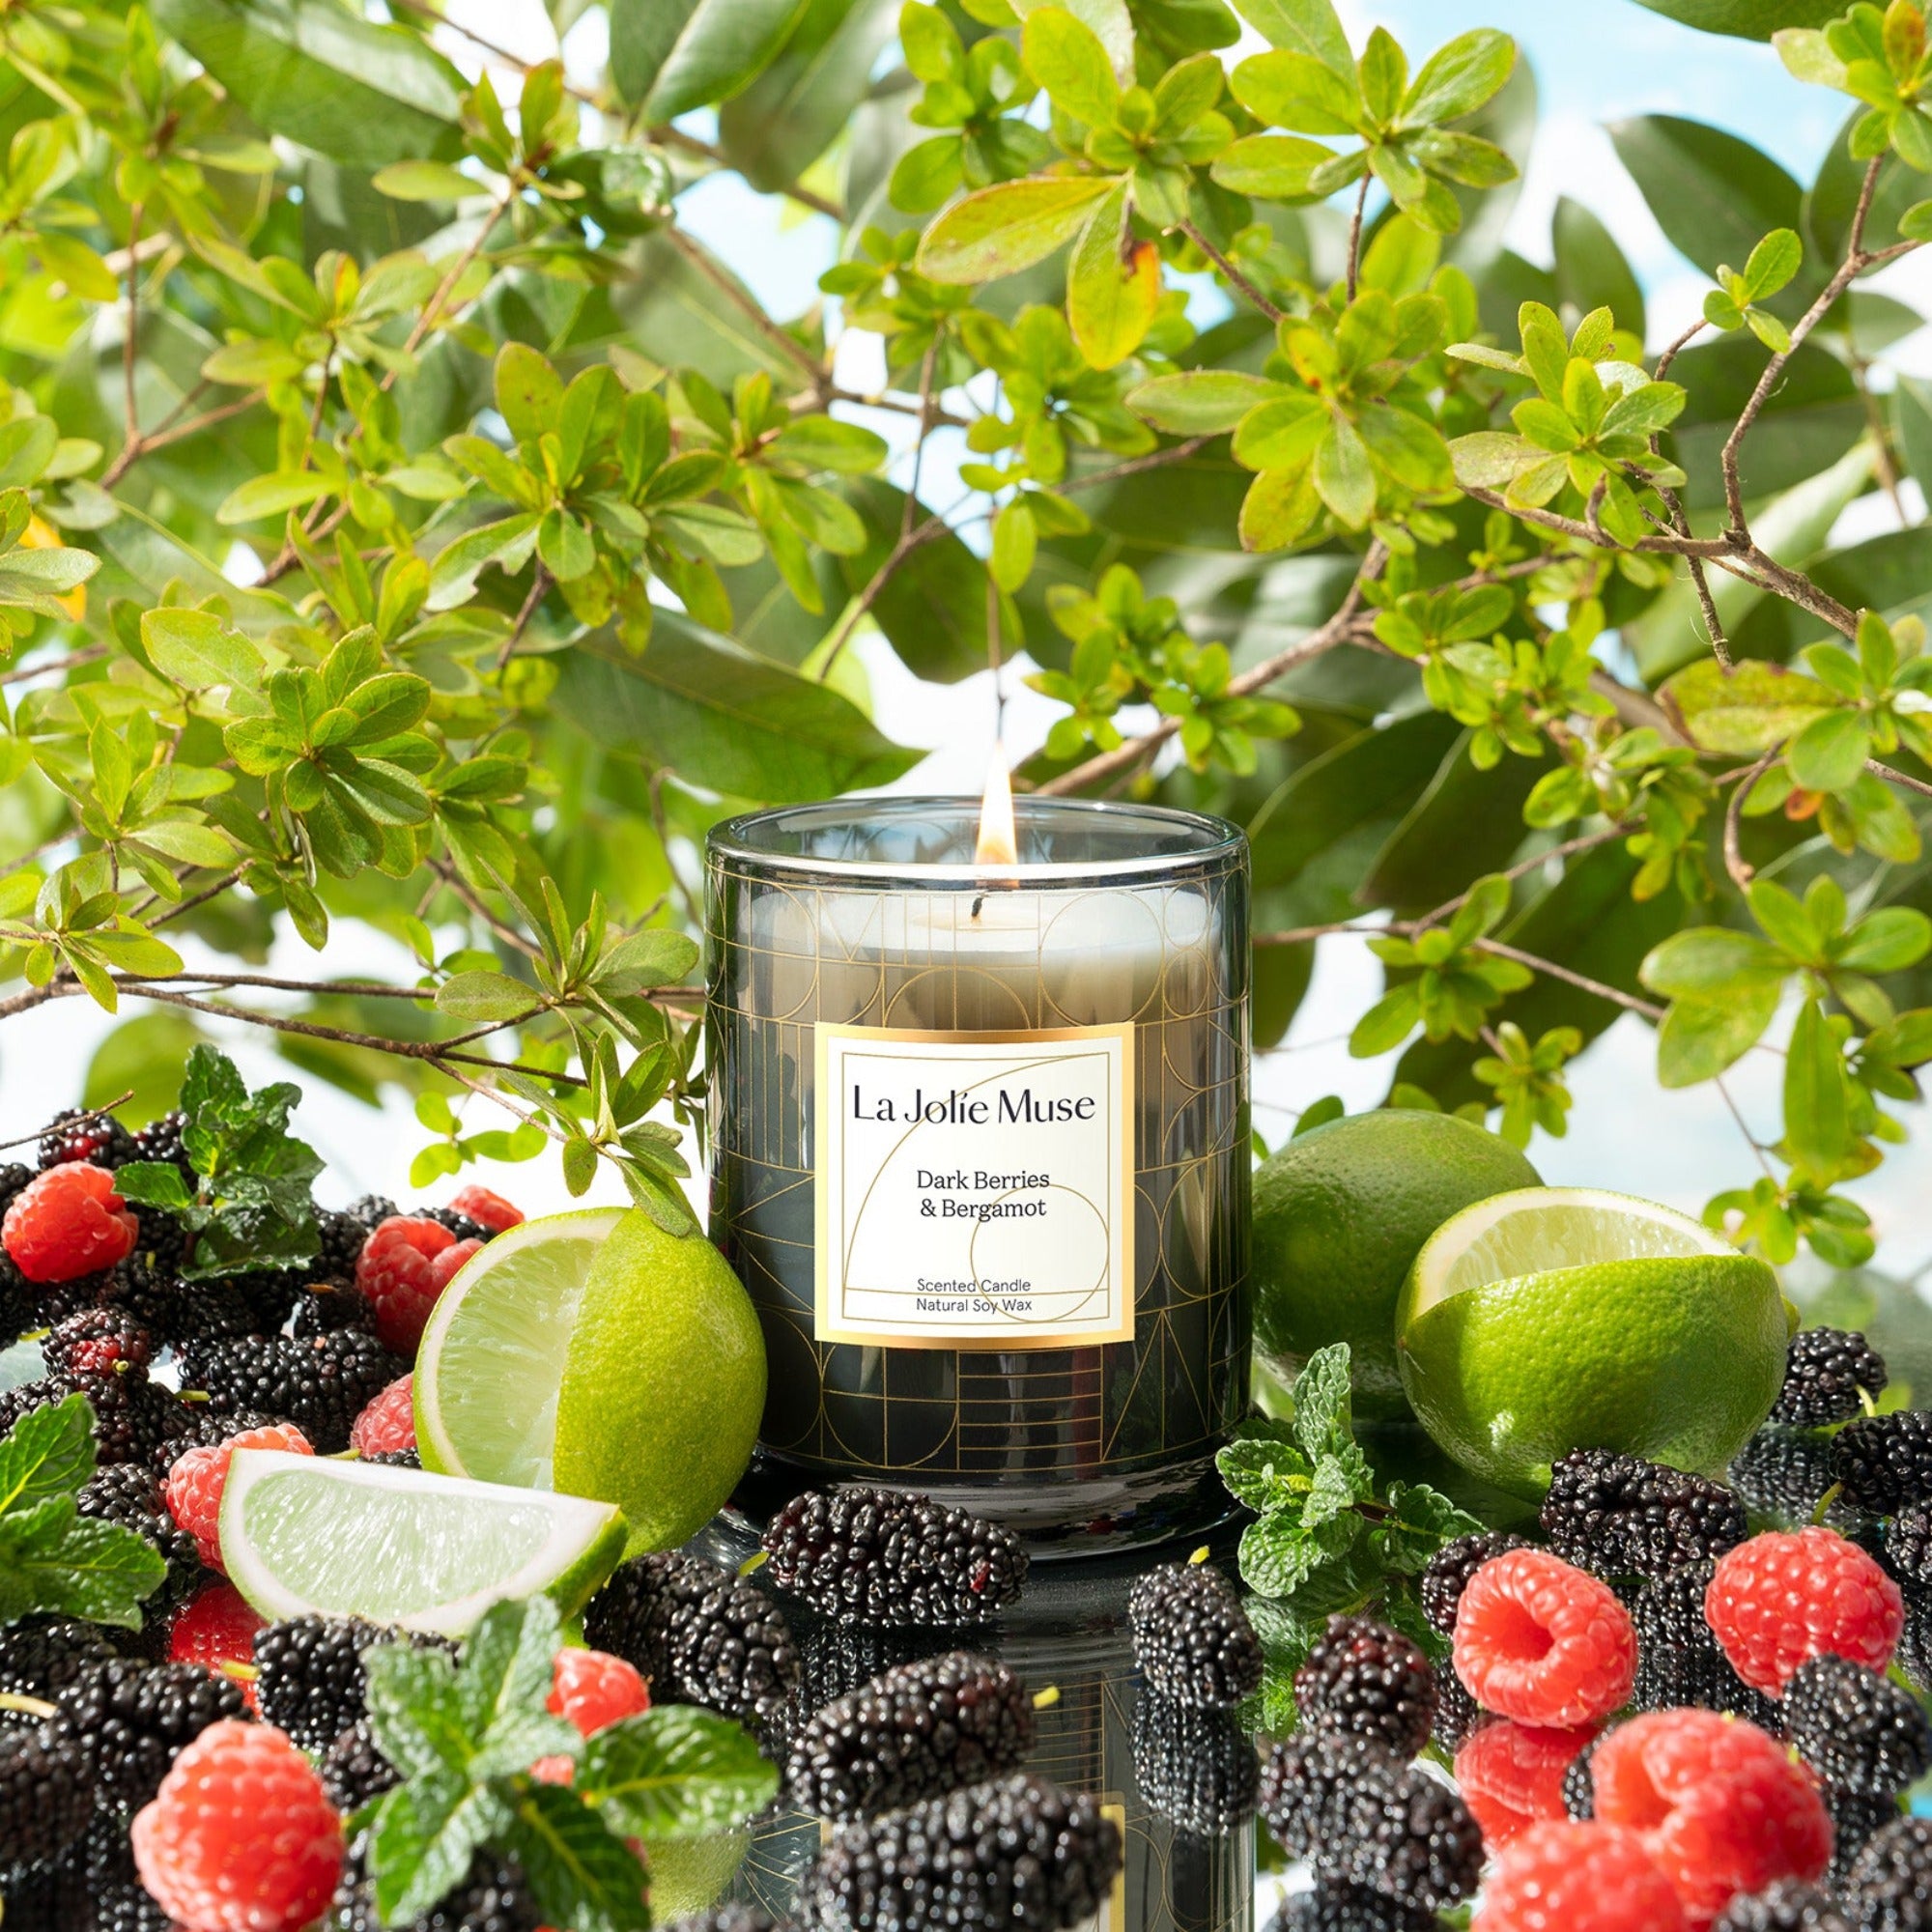  Photo shot of a Roesia - Dark Berries & Bergamot 9.9oz candle placed on a mirror, surrounded by sliced lemons, raspberries, blackberries, with plants behind the candle